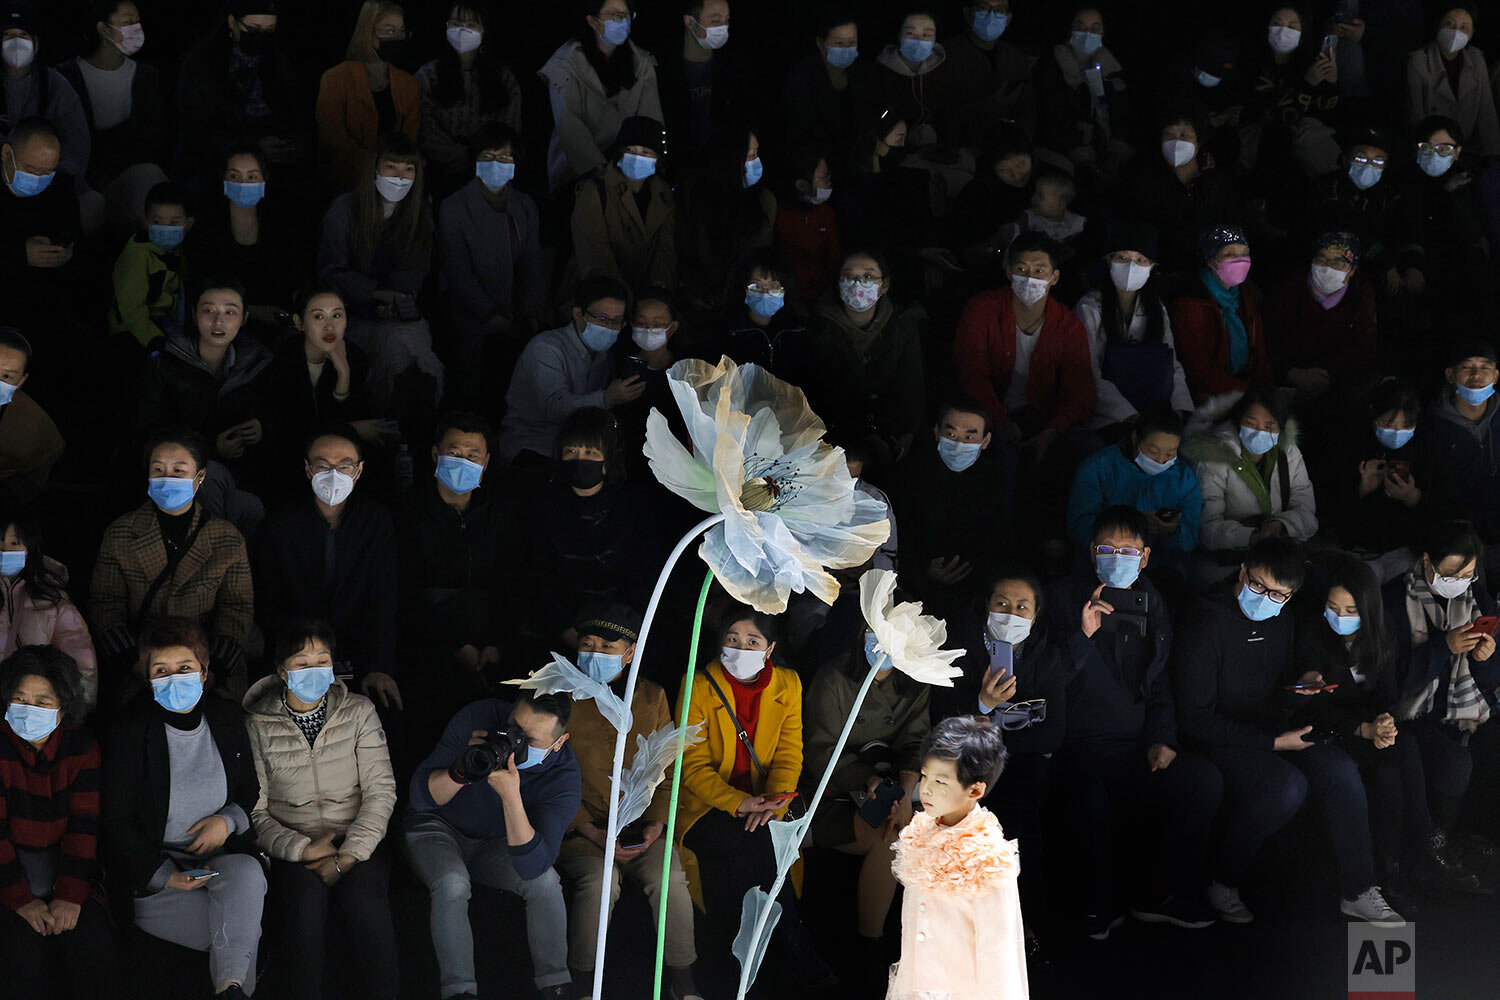  Attendees wear masks during a children's fashion show in Beijing on Sunday, March 28, 2021. (AP Photo/Ng Han Guan) 